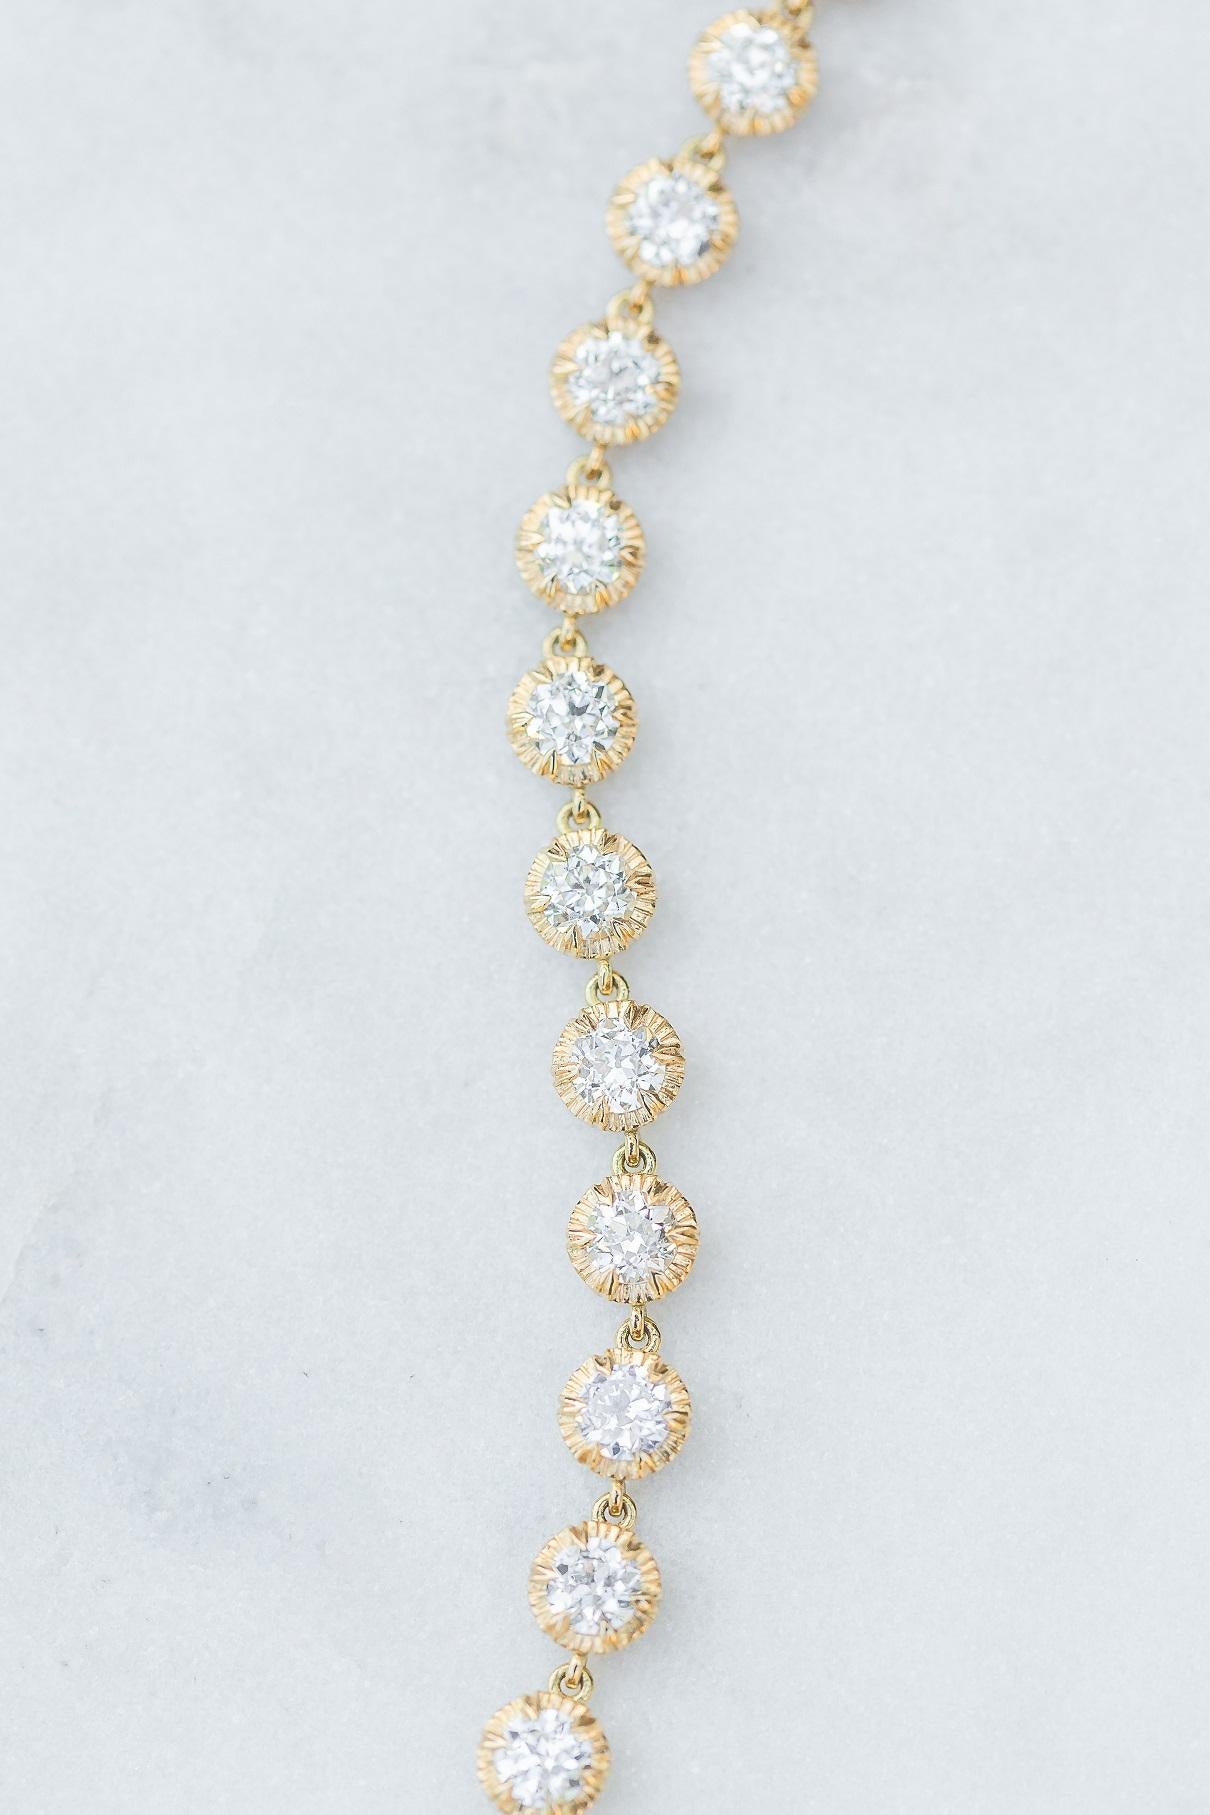 4.82ctw GH/VS-SI old European cut diamonds set in a handcrafted 18K yellow gold diamond tennis bracelet.  

Our jewelry is made locally in Los Angeles and most pieces are made to order. For these made-to-order items, please allow 8-10 weeks for